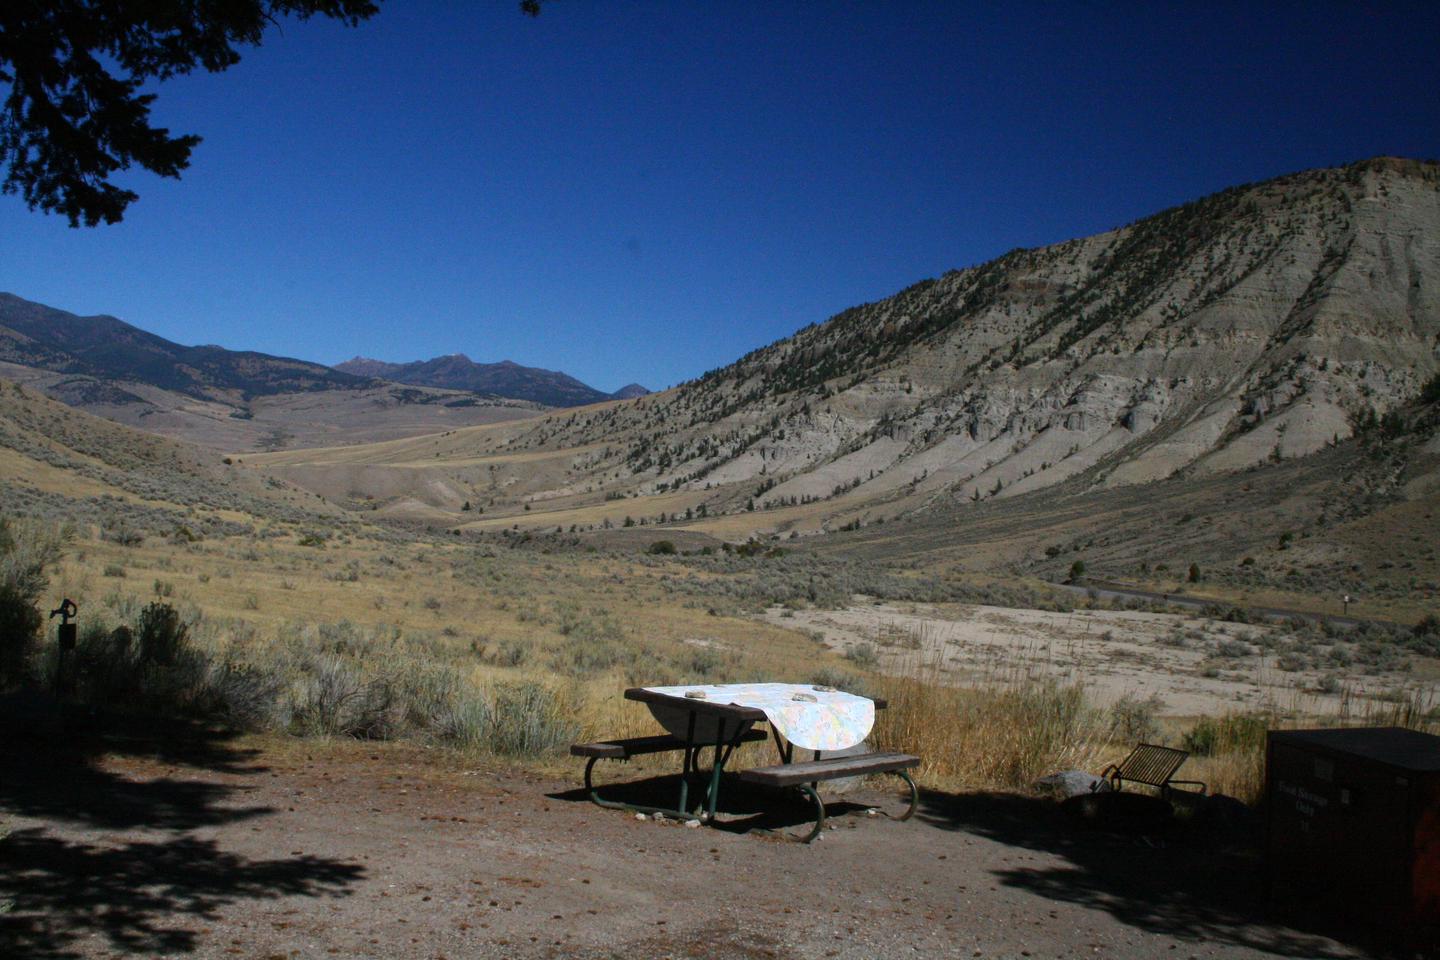 Mammoth Hot Springs Campground Site 35.Mammoth Campsite #35, looking north